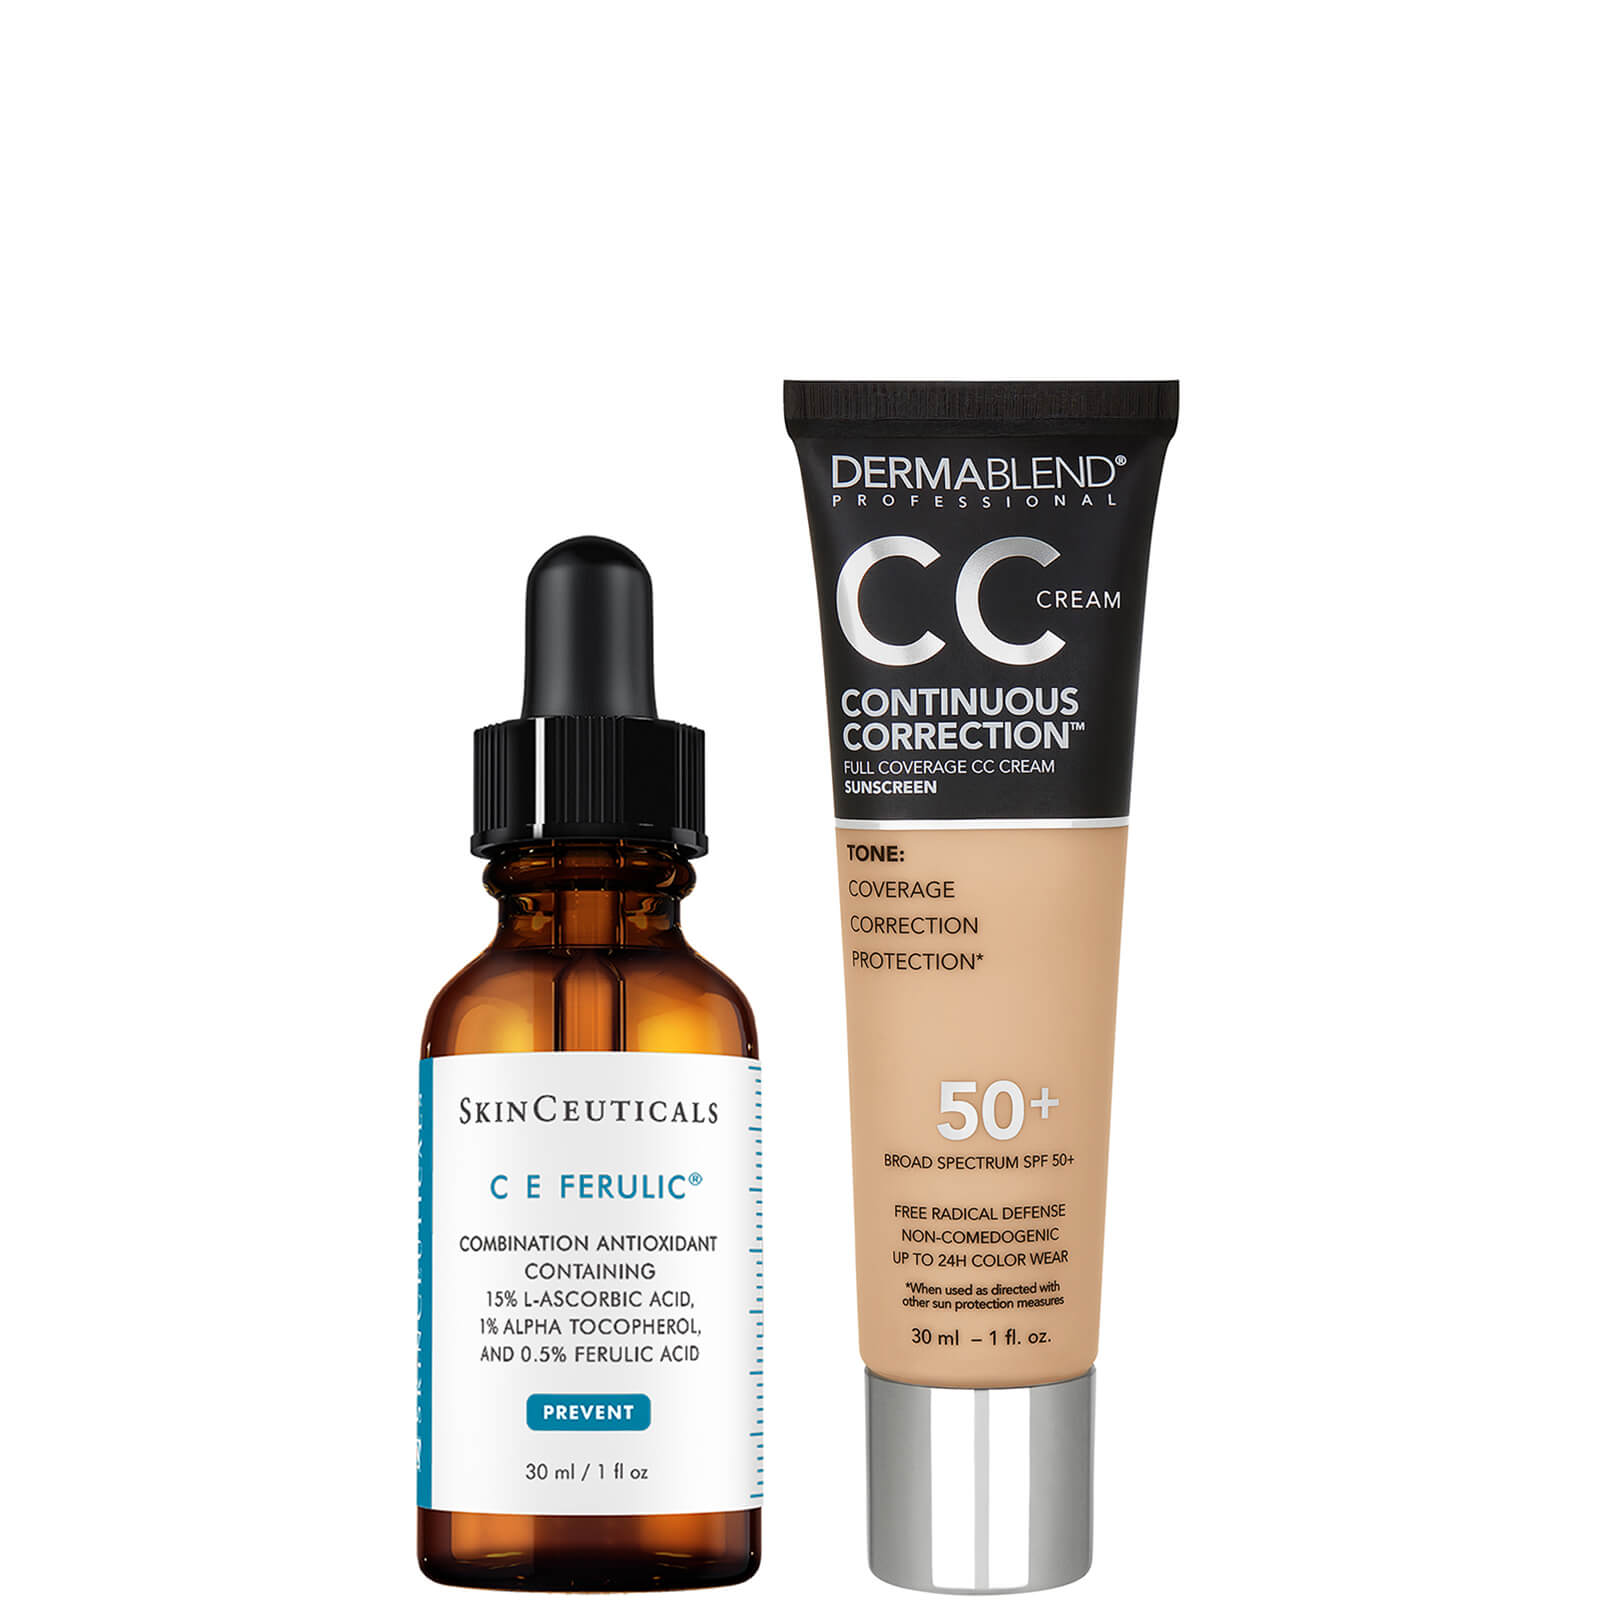 SkinCeuticals and Dermablend Anti-Aging Brightening Duo with Vitamin C and Niacinamide (Various Shades) ($223 Value) - 35N Light to Med